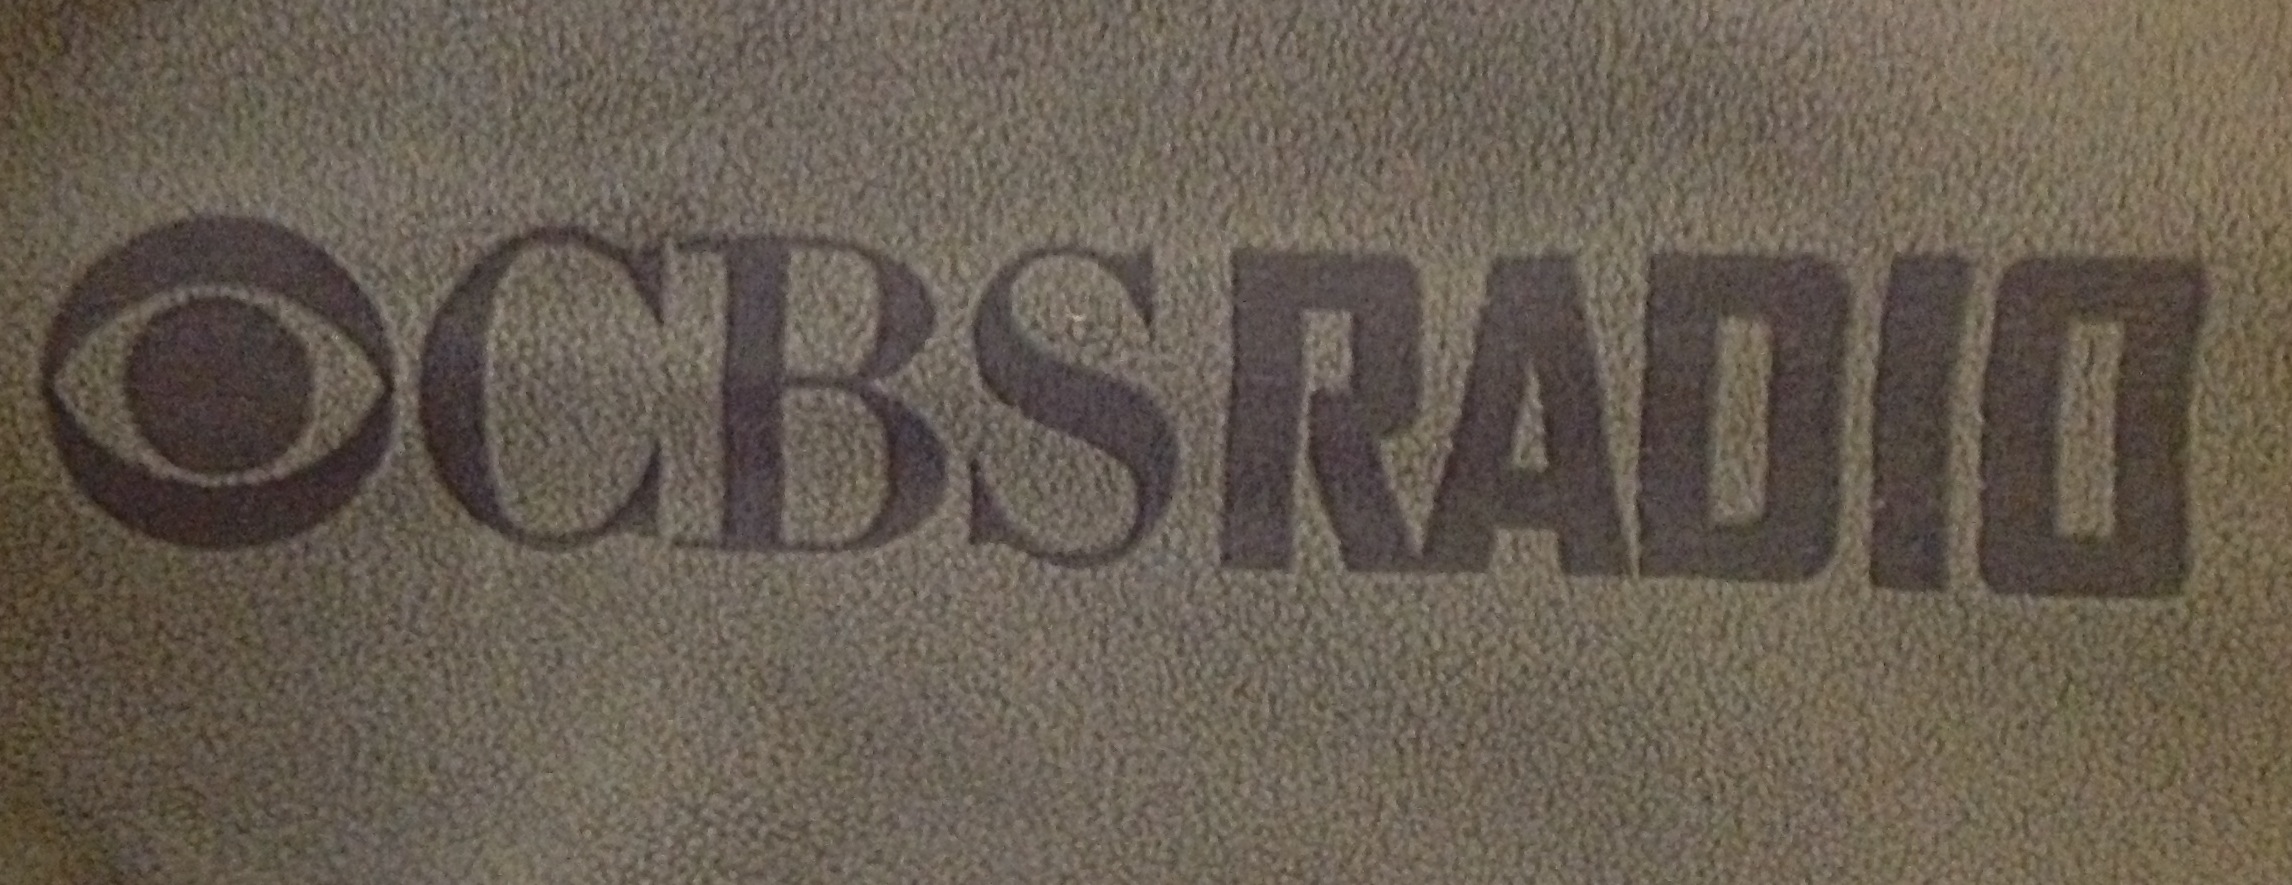 Photo of laser etching on the sleeve of a fleece jacket.